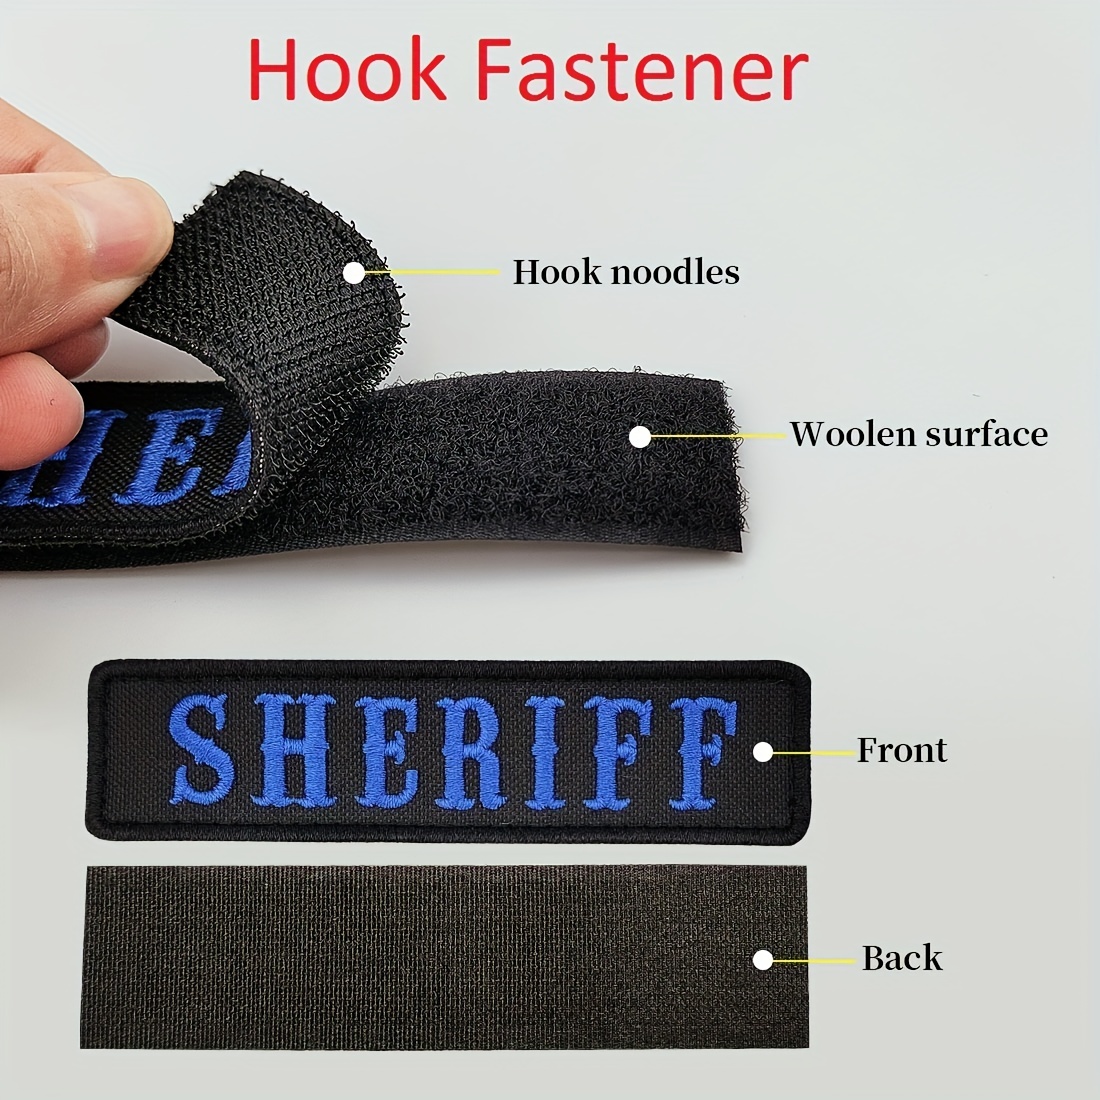 Custom Name Patches Embroidered Personalized Stripes Badge Hook Backing Or  Iron On For Clothing,Uniform,Hat Morale,Dog Collar